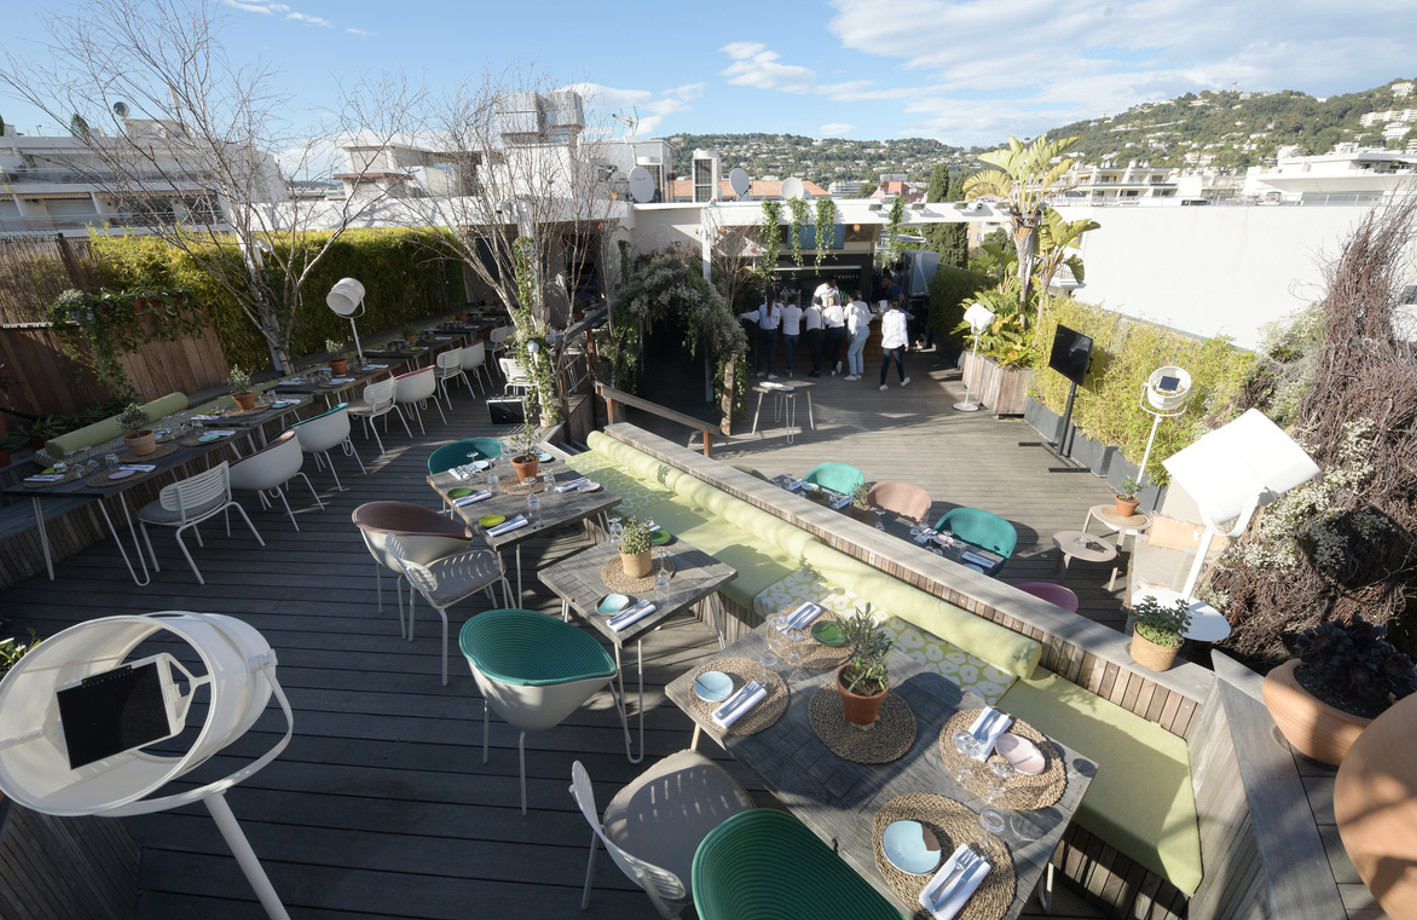 3.14 ROOFTOP TO START SERVING LUNCH DURING THE CANNES FILM FESTIVAL